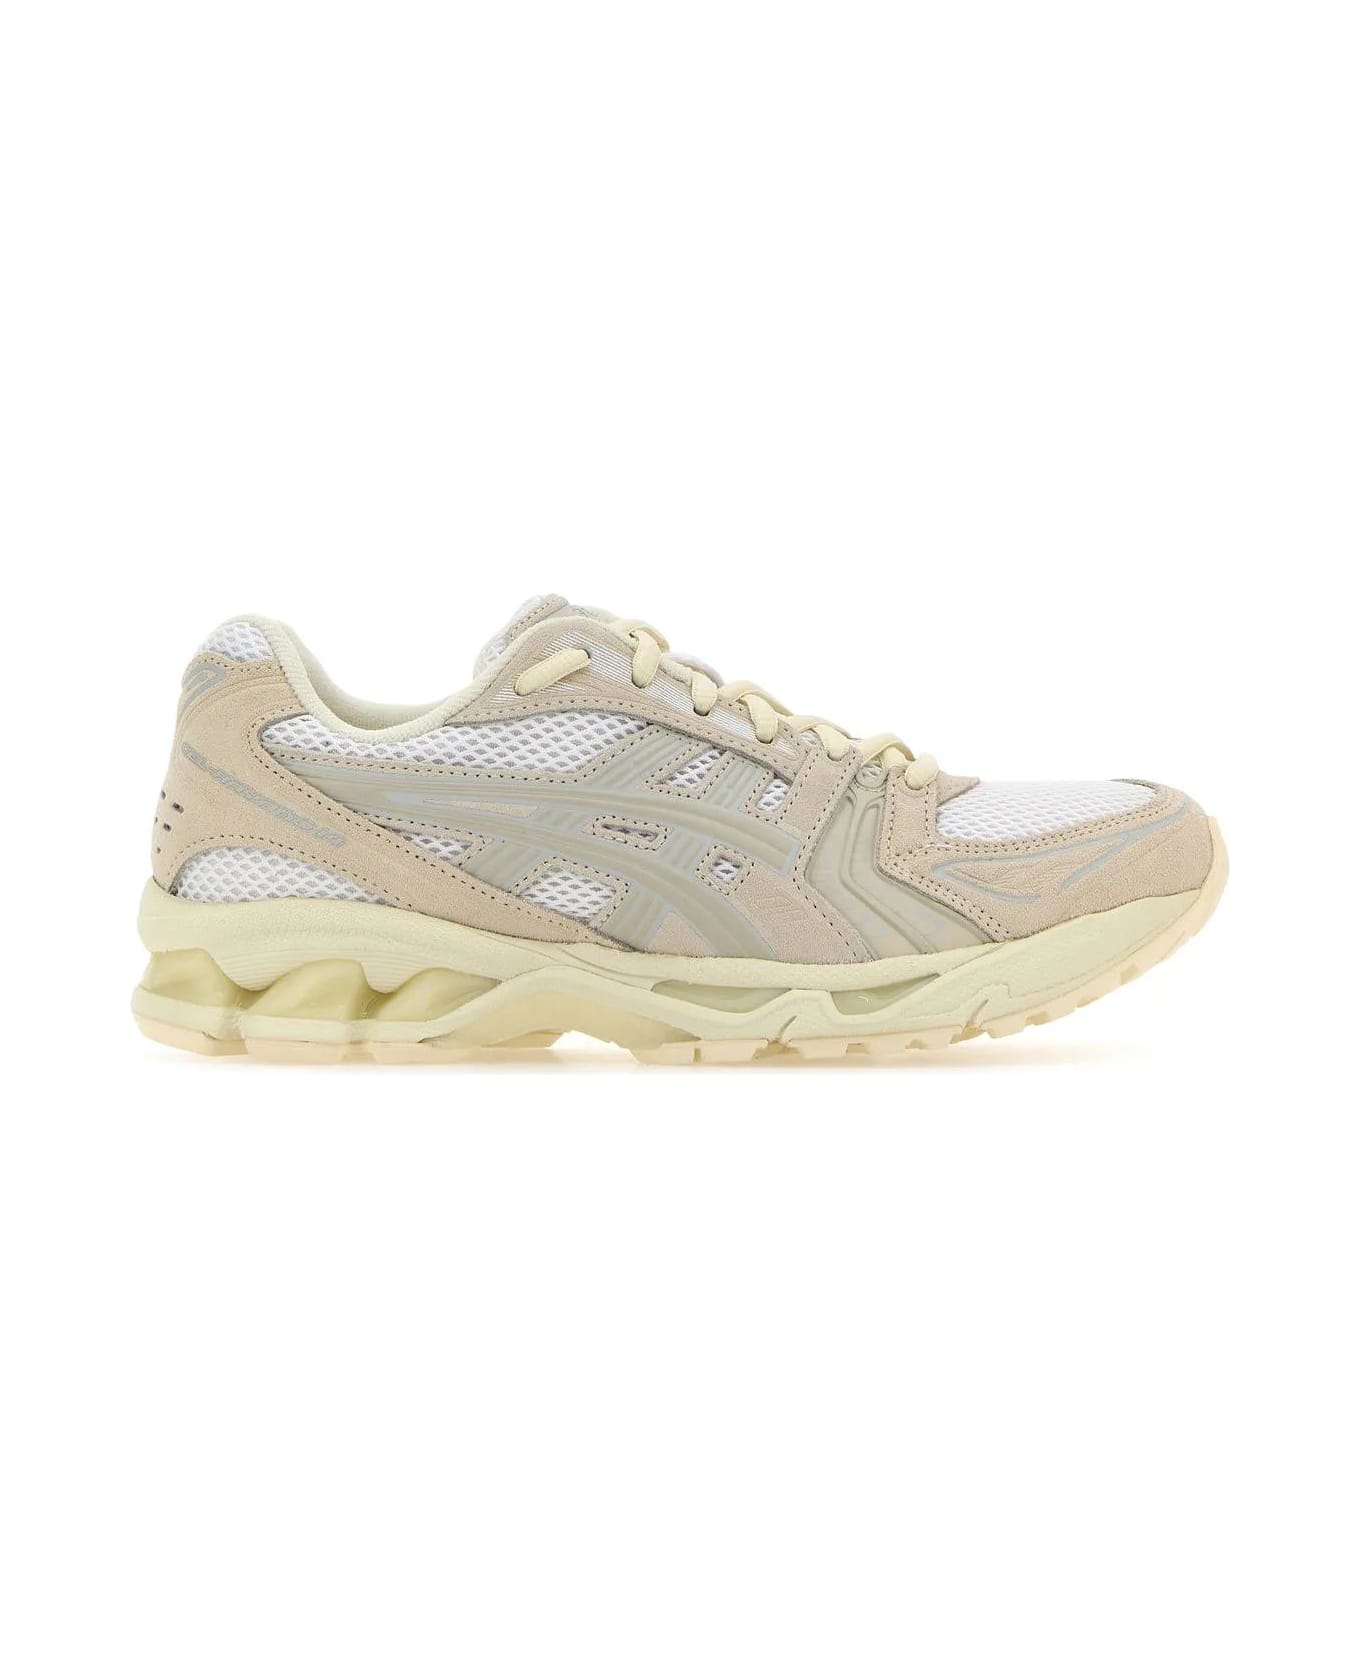 Asics Two-tone Mesh And Suede Gel-kayano 14 Sneakers - WHITE